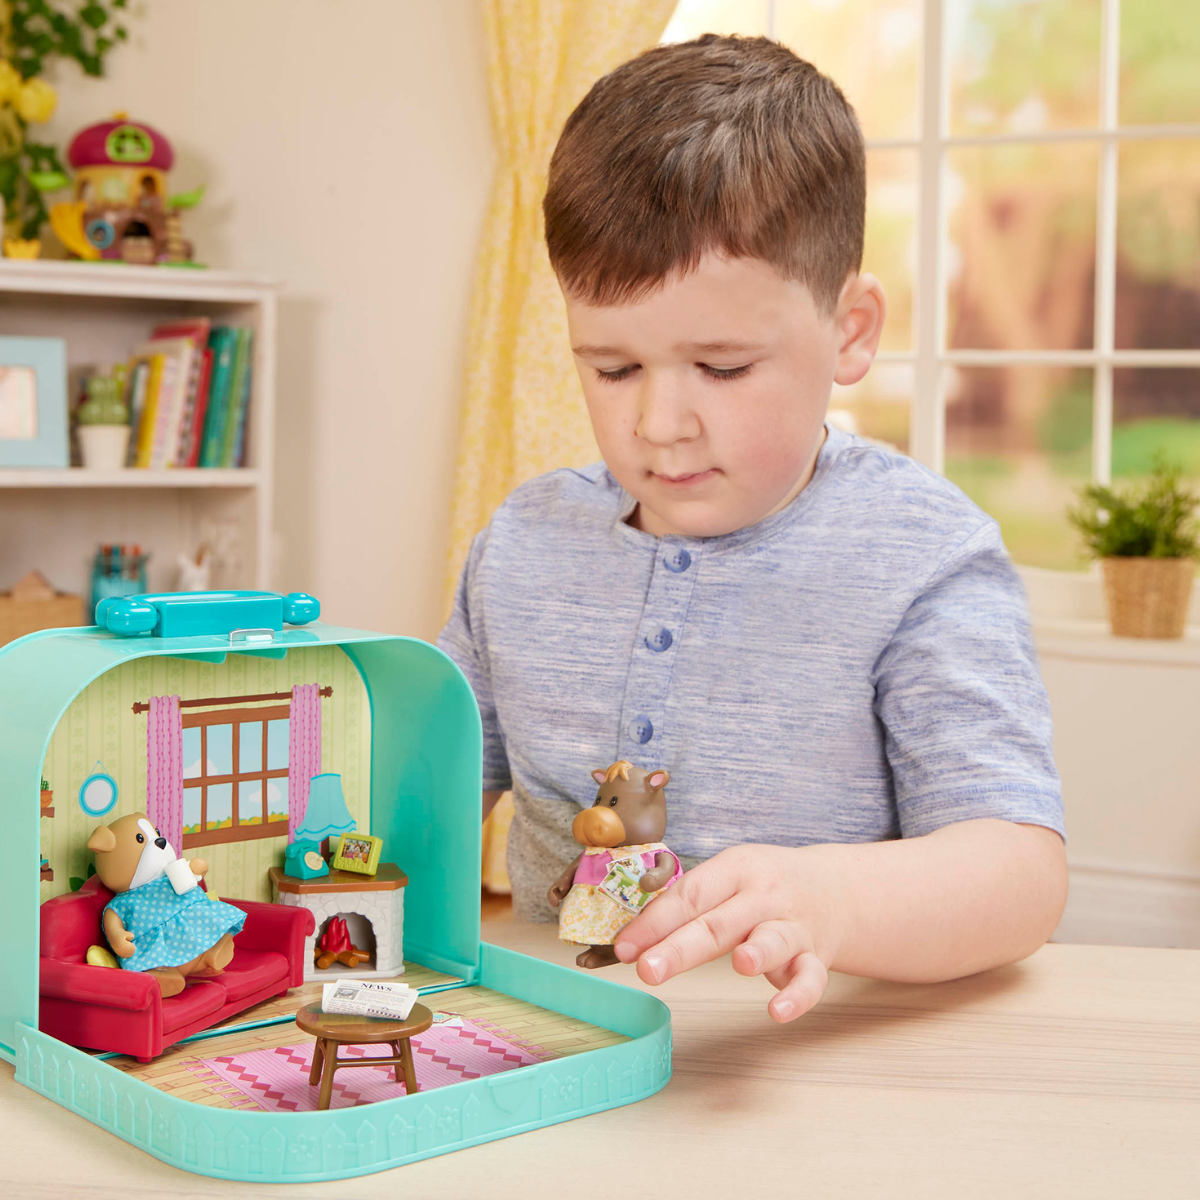 Living Room Suitcase Playset